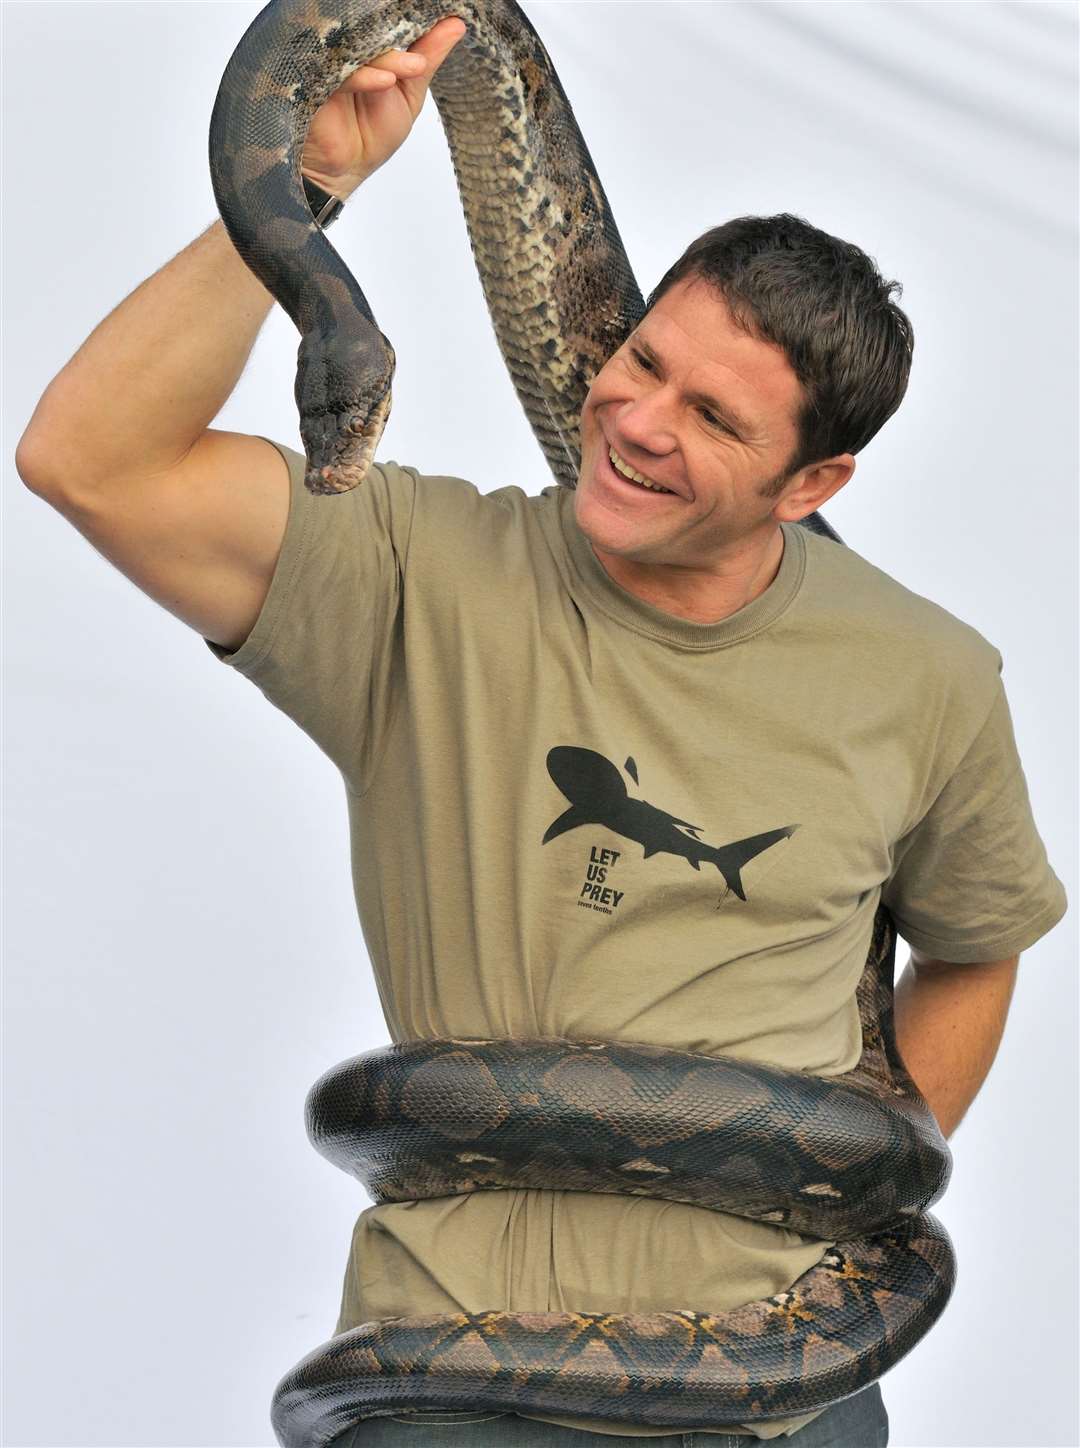 Steve Backshall will be at Bluewater Picture: Adam White